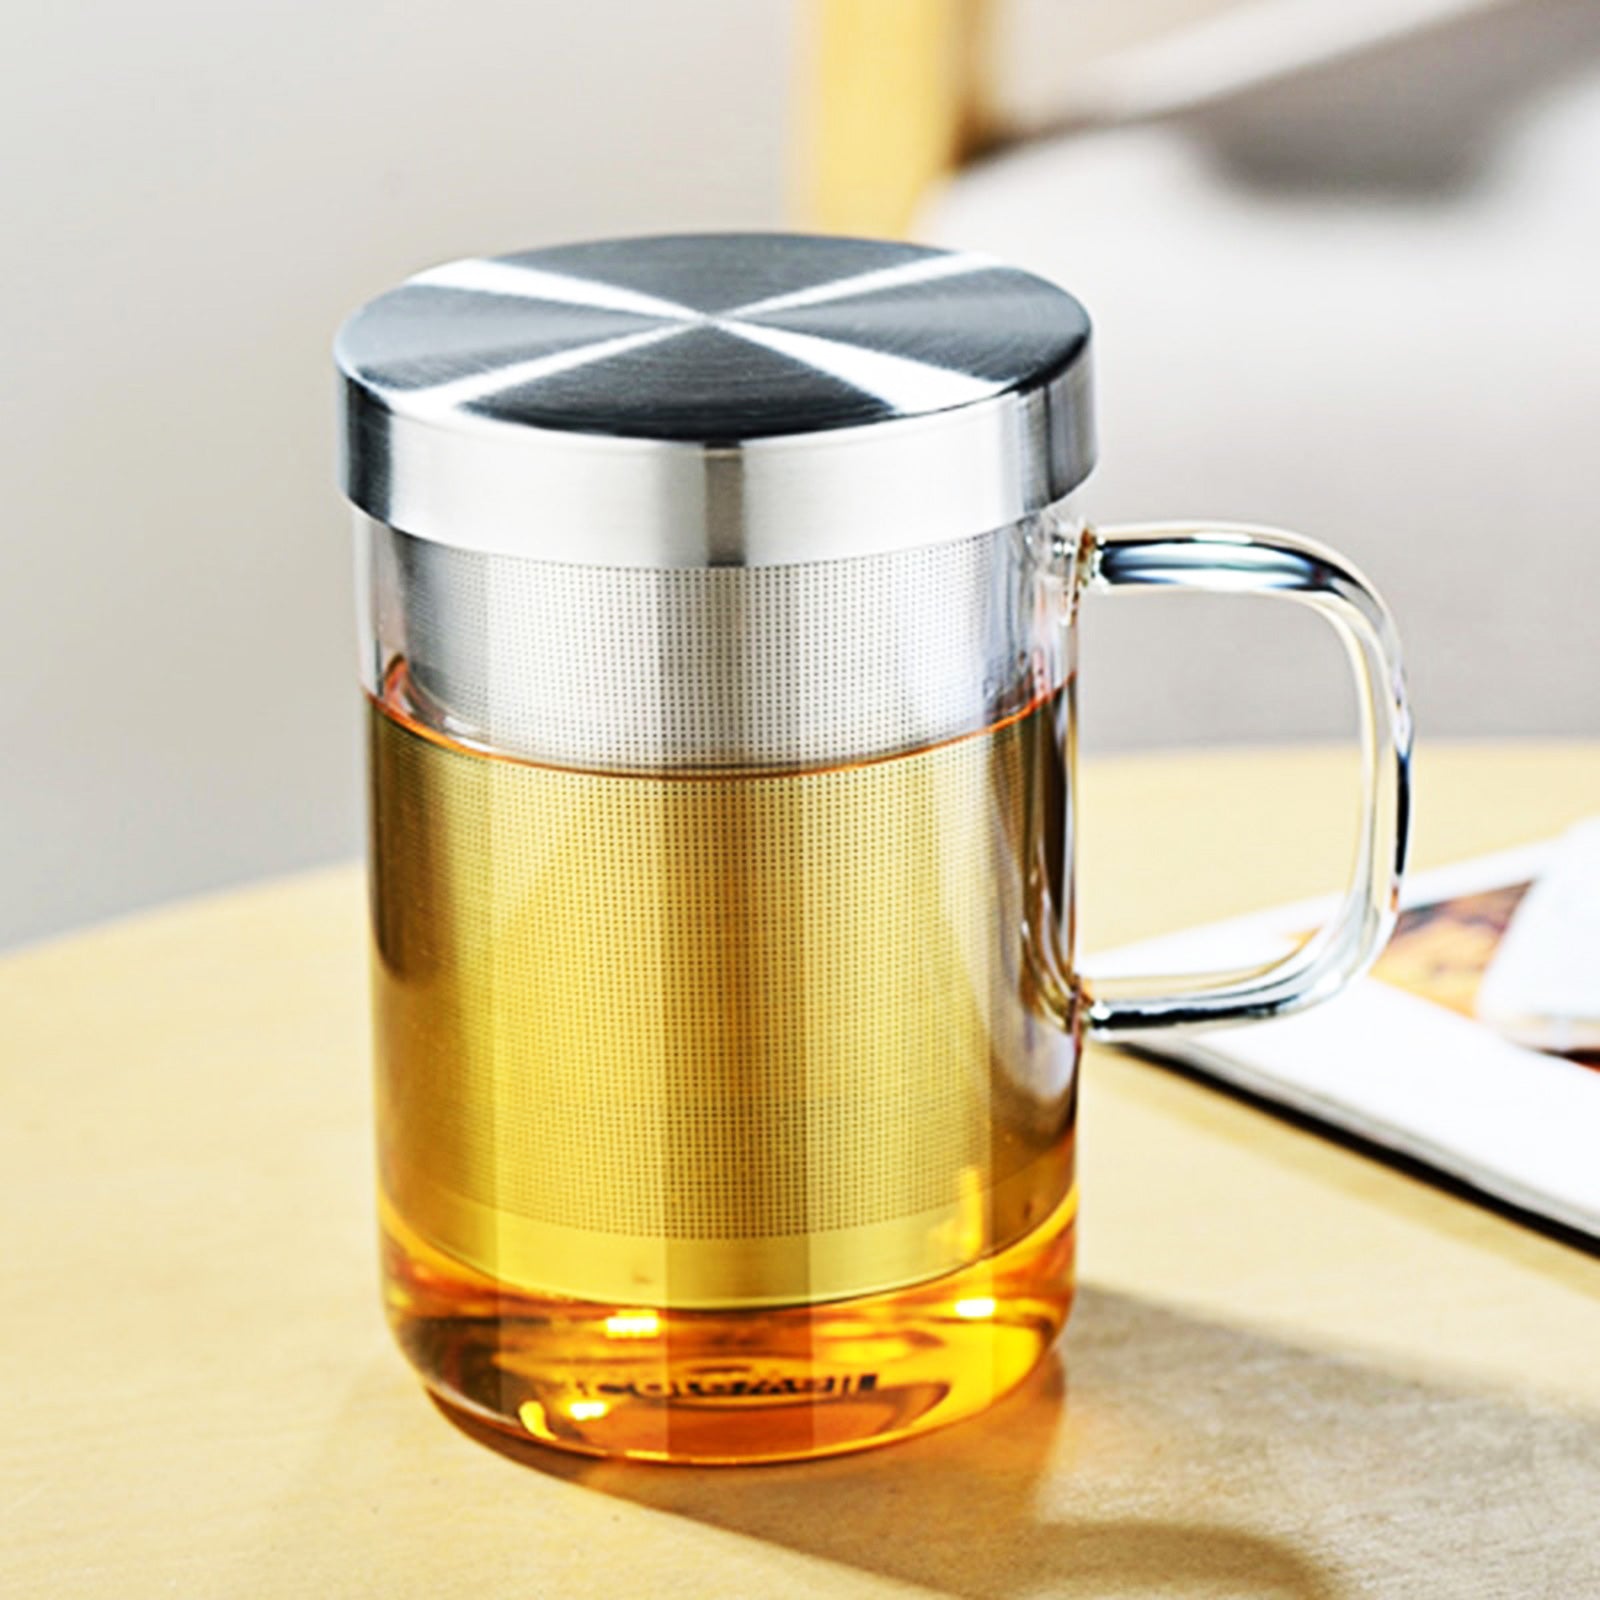 Tea Time, Anytime: Glass Infuser Mug for Your Perfect Cup